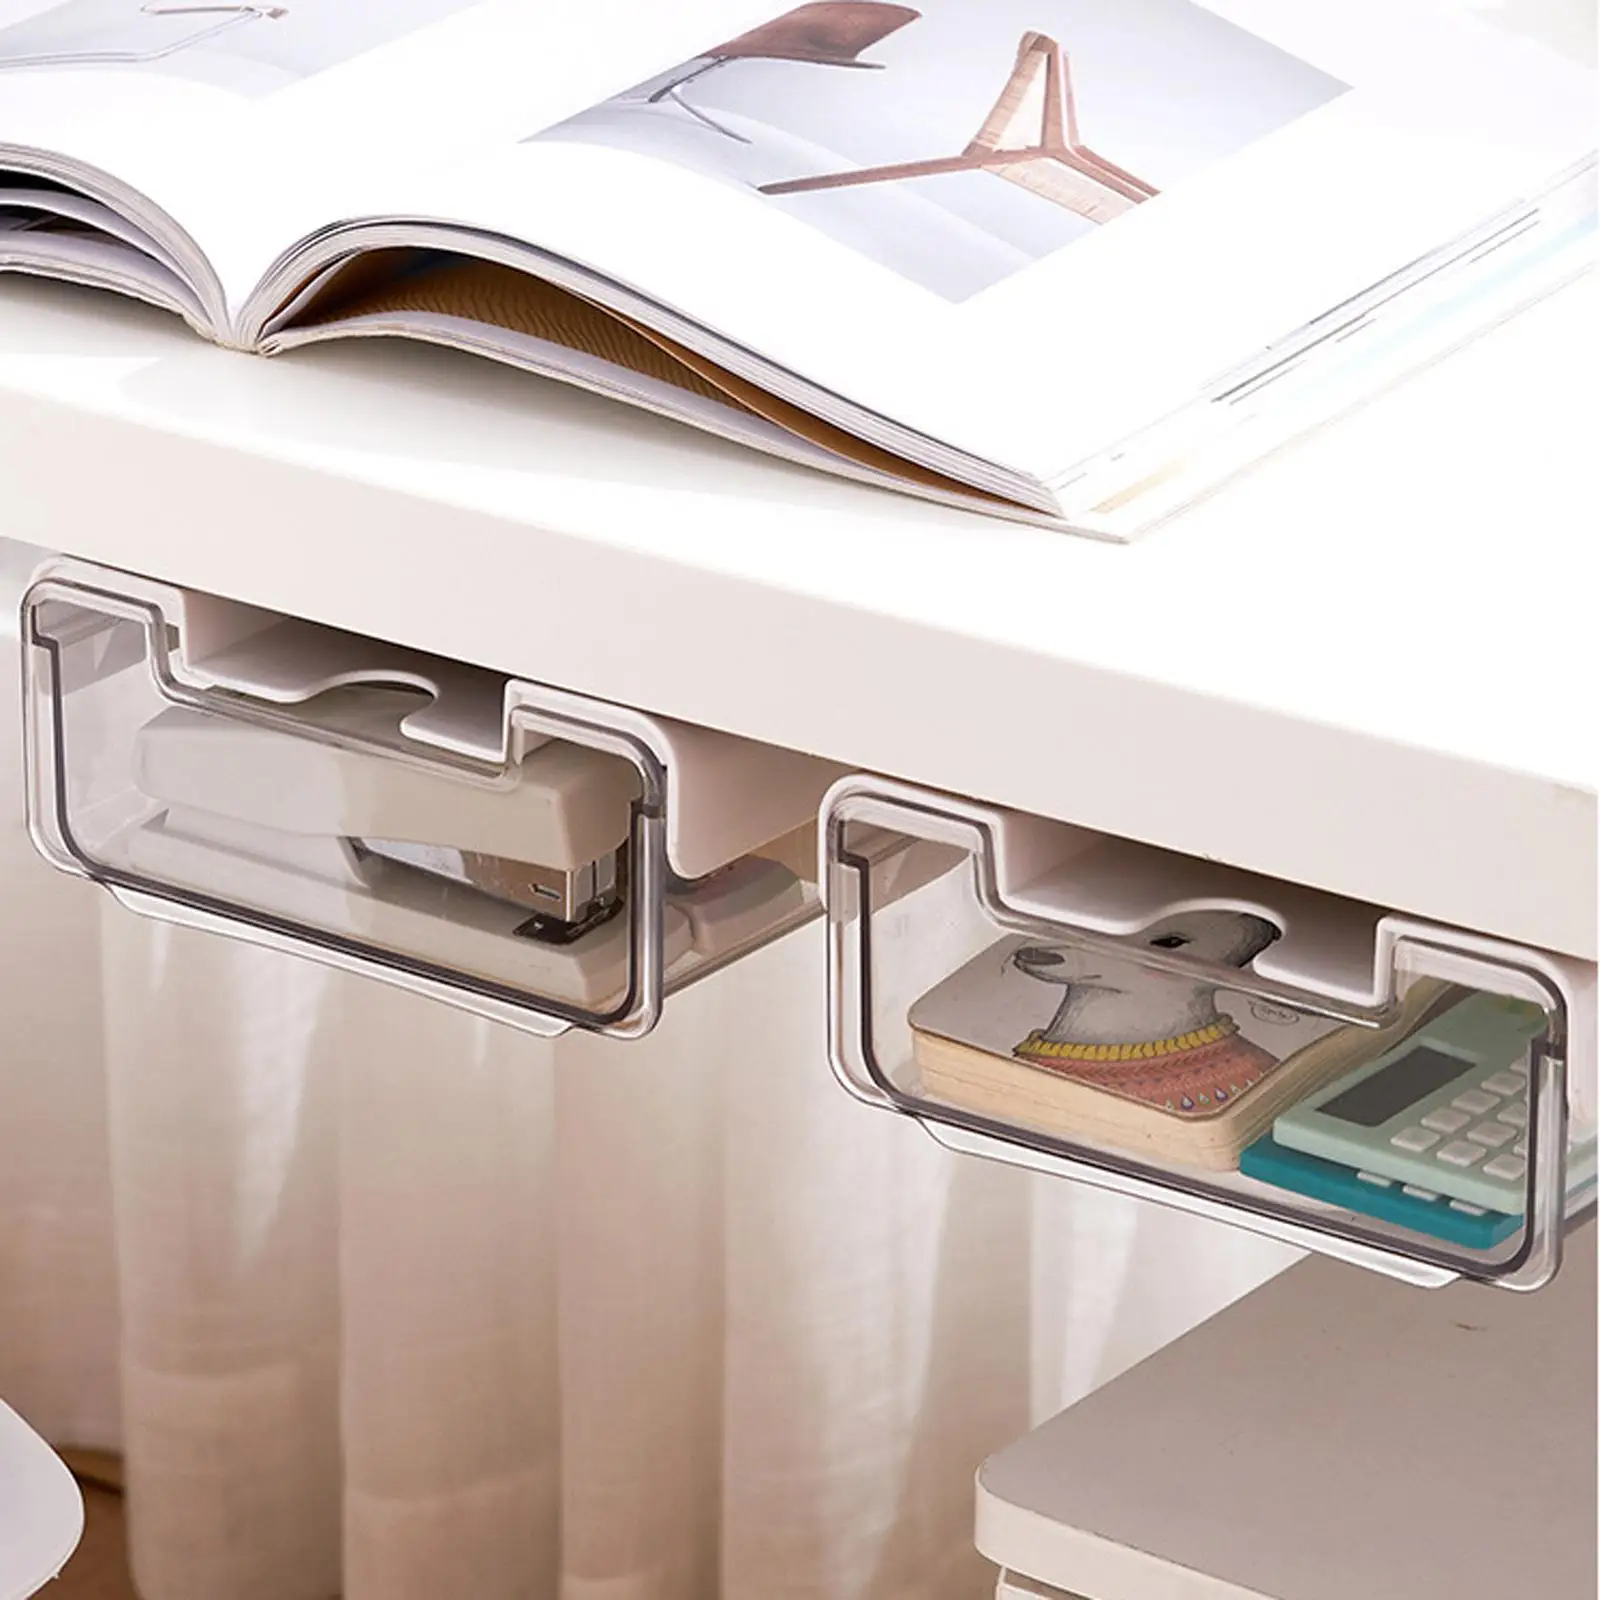 Drawer Type Storage Box Pull Out Storage Container Expandable Drawer Tray Small Self Adhesive for Storage Desktop Bathroom Home